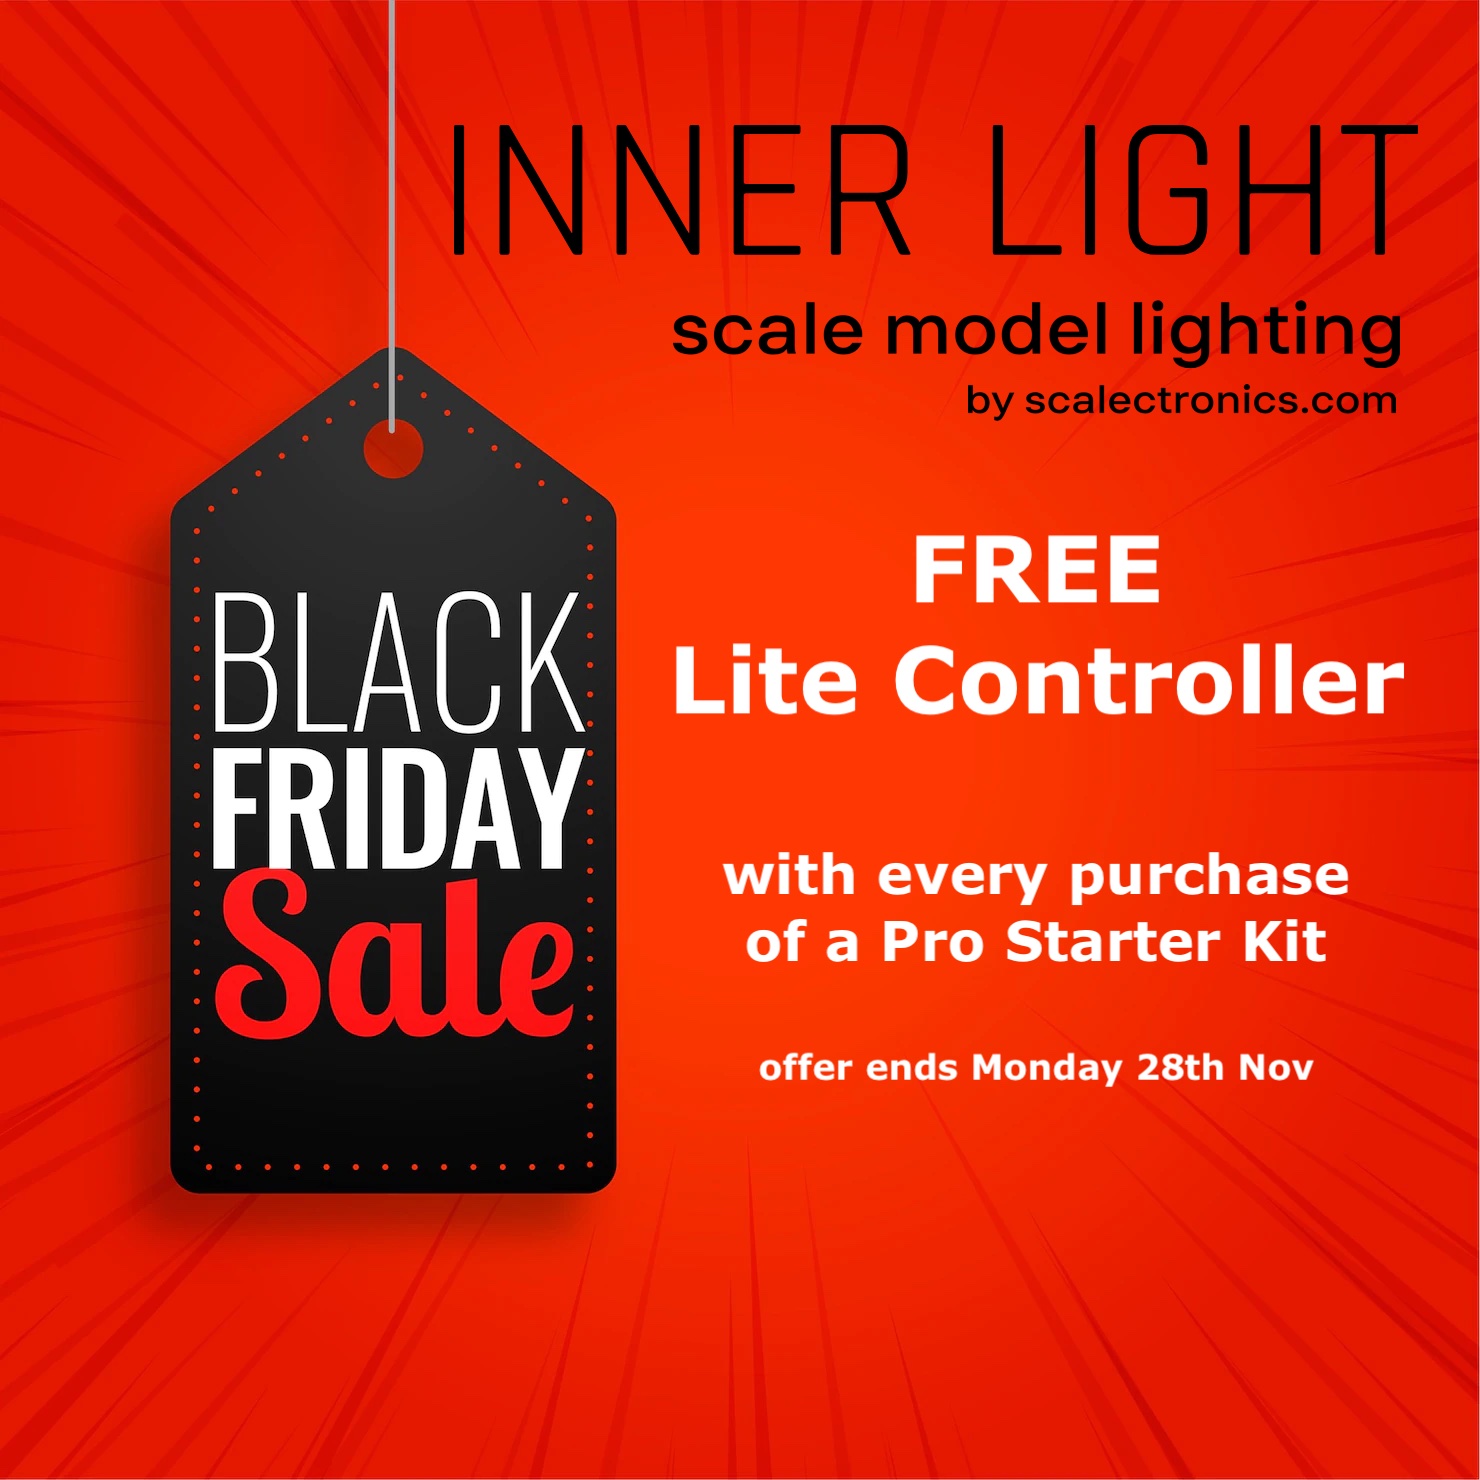 Scalectronics Black Friday Offer